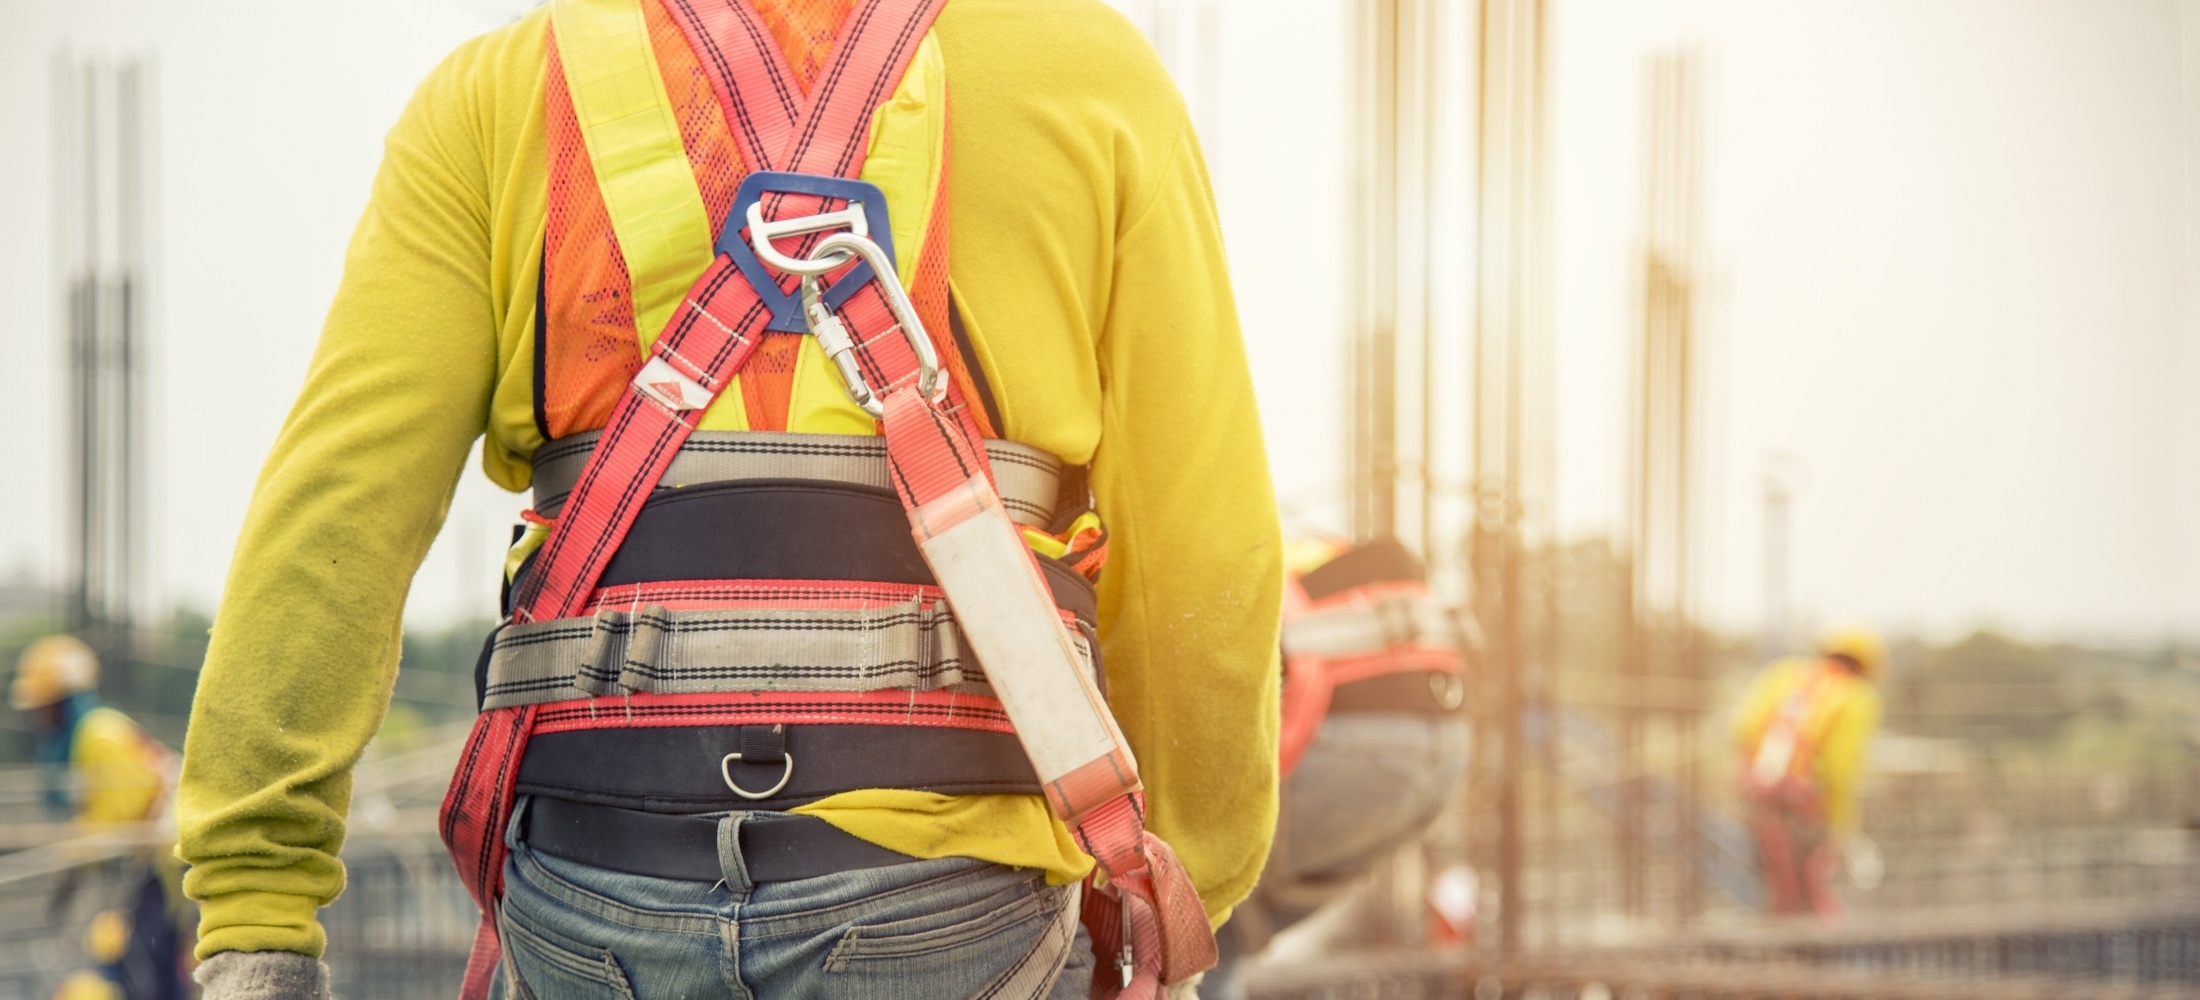 A construction worker wearing a protective safety harness walks to the job site.